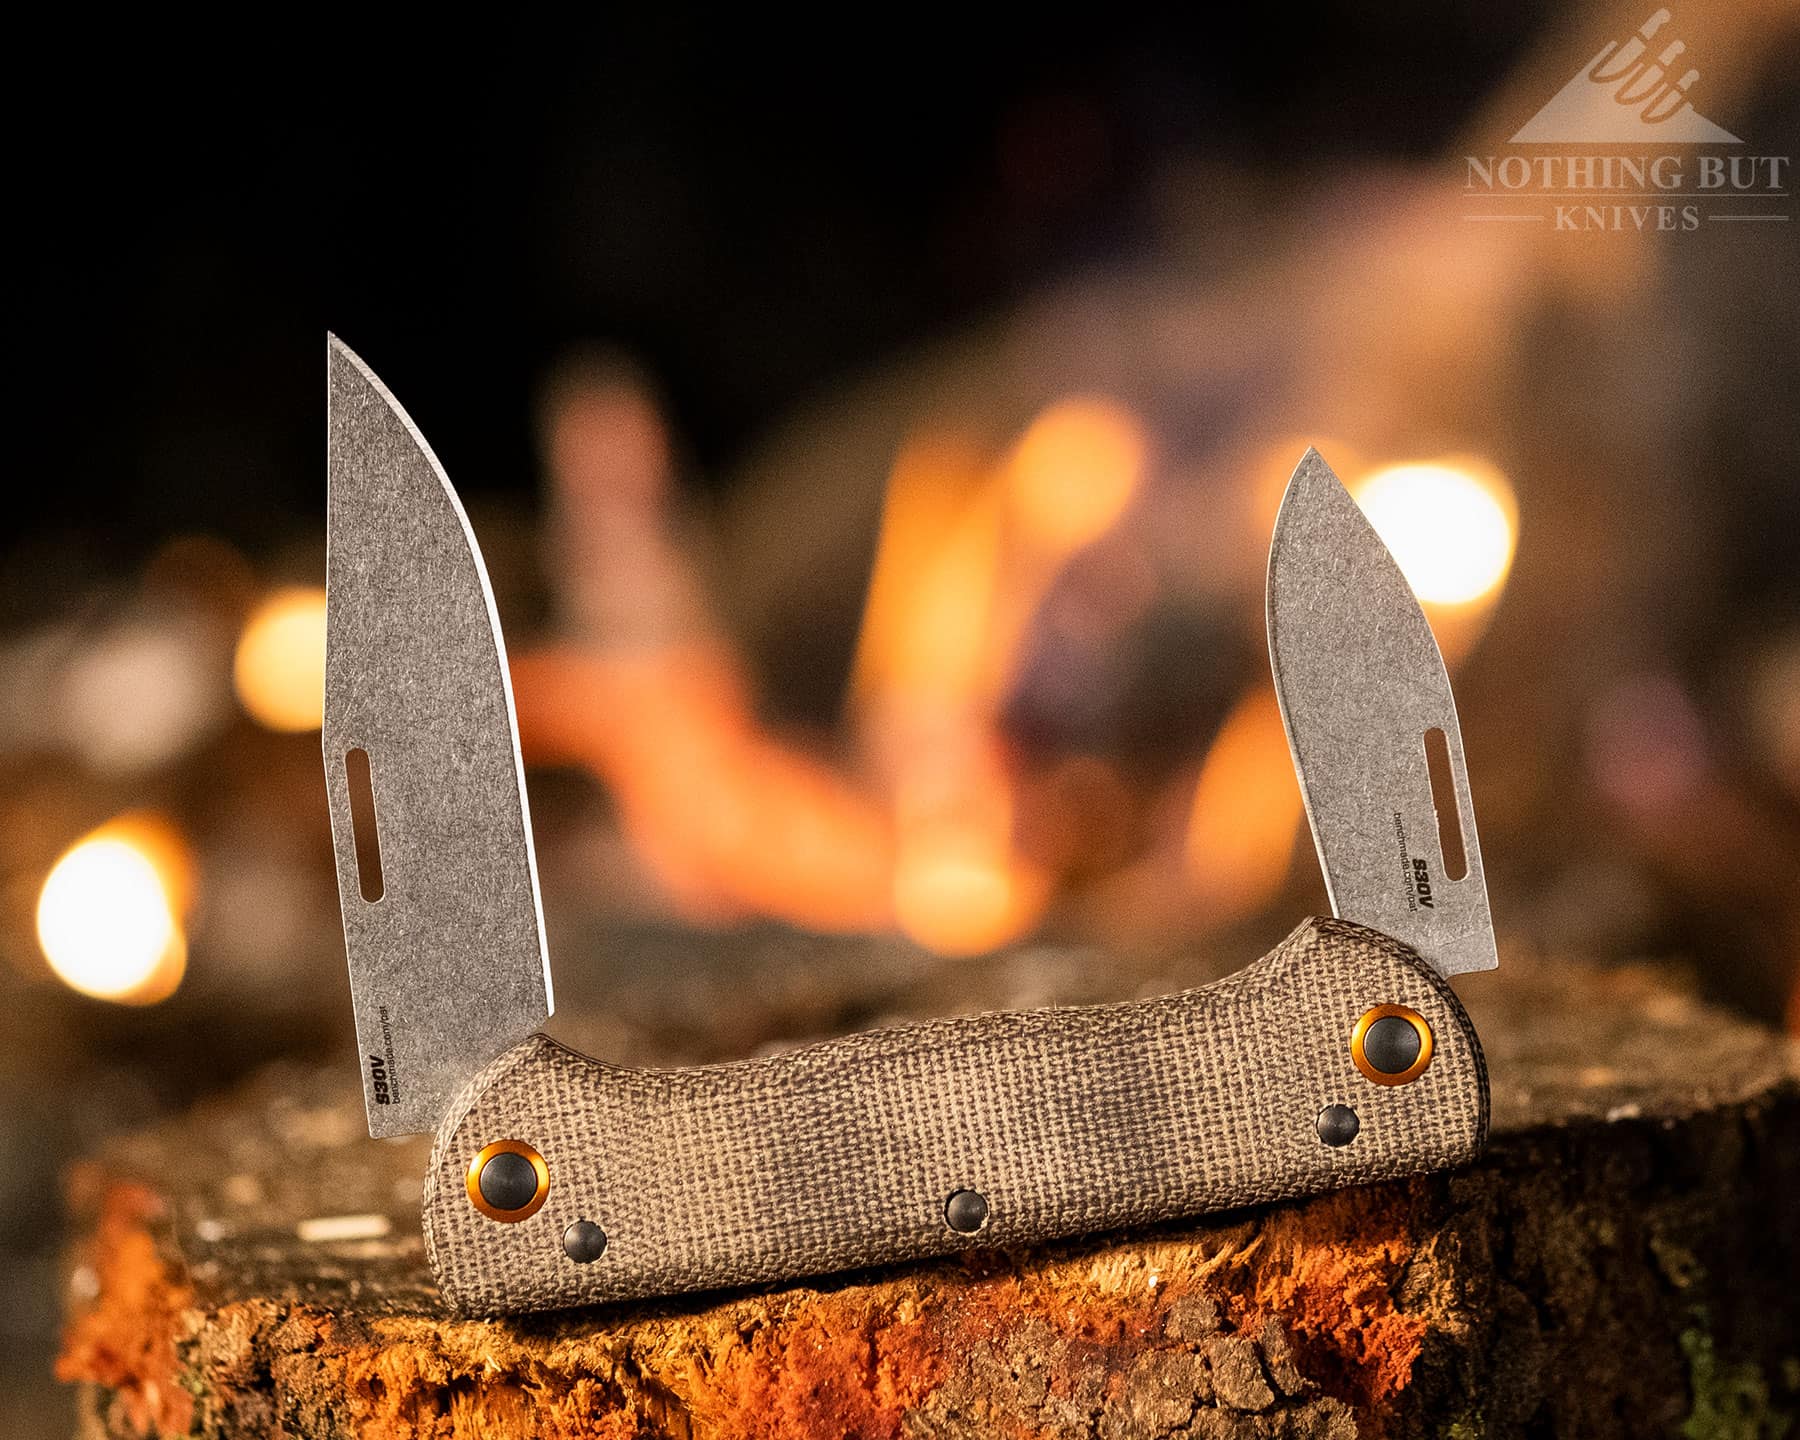 The Benchmade Weekender one a Drunken Hillbilly Knife Award for The Best Knife You'll Lose in a Backpack.